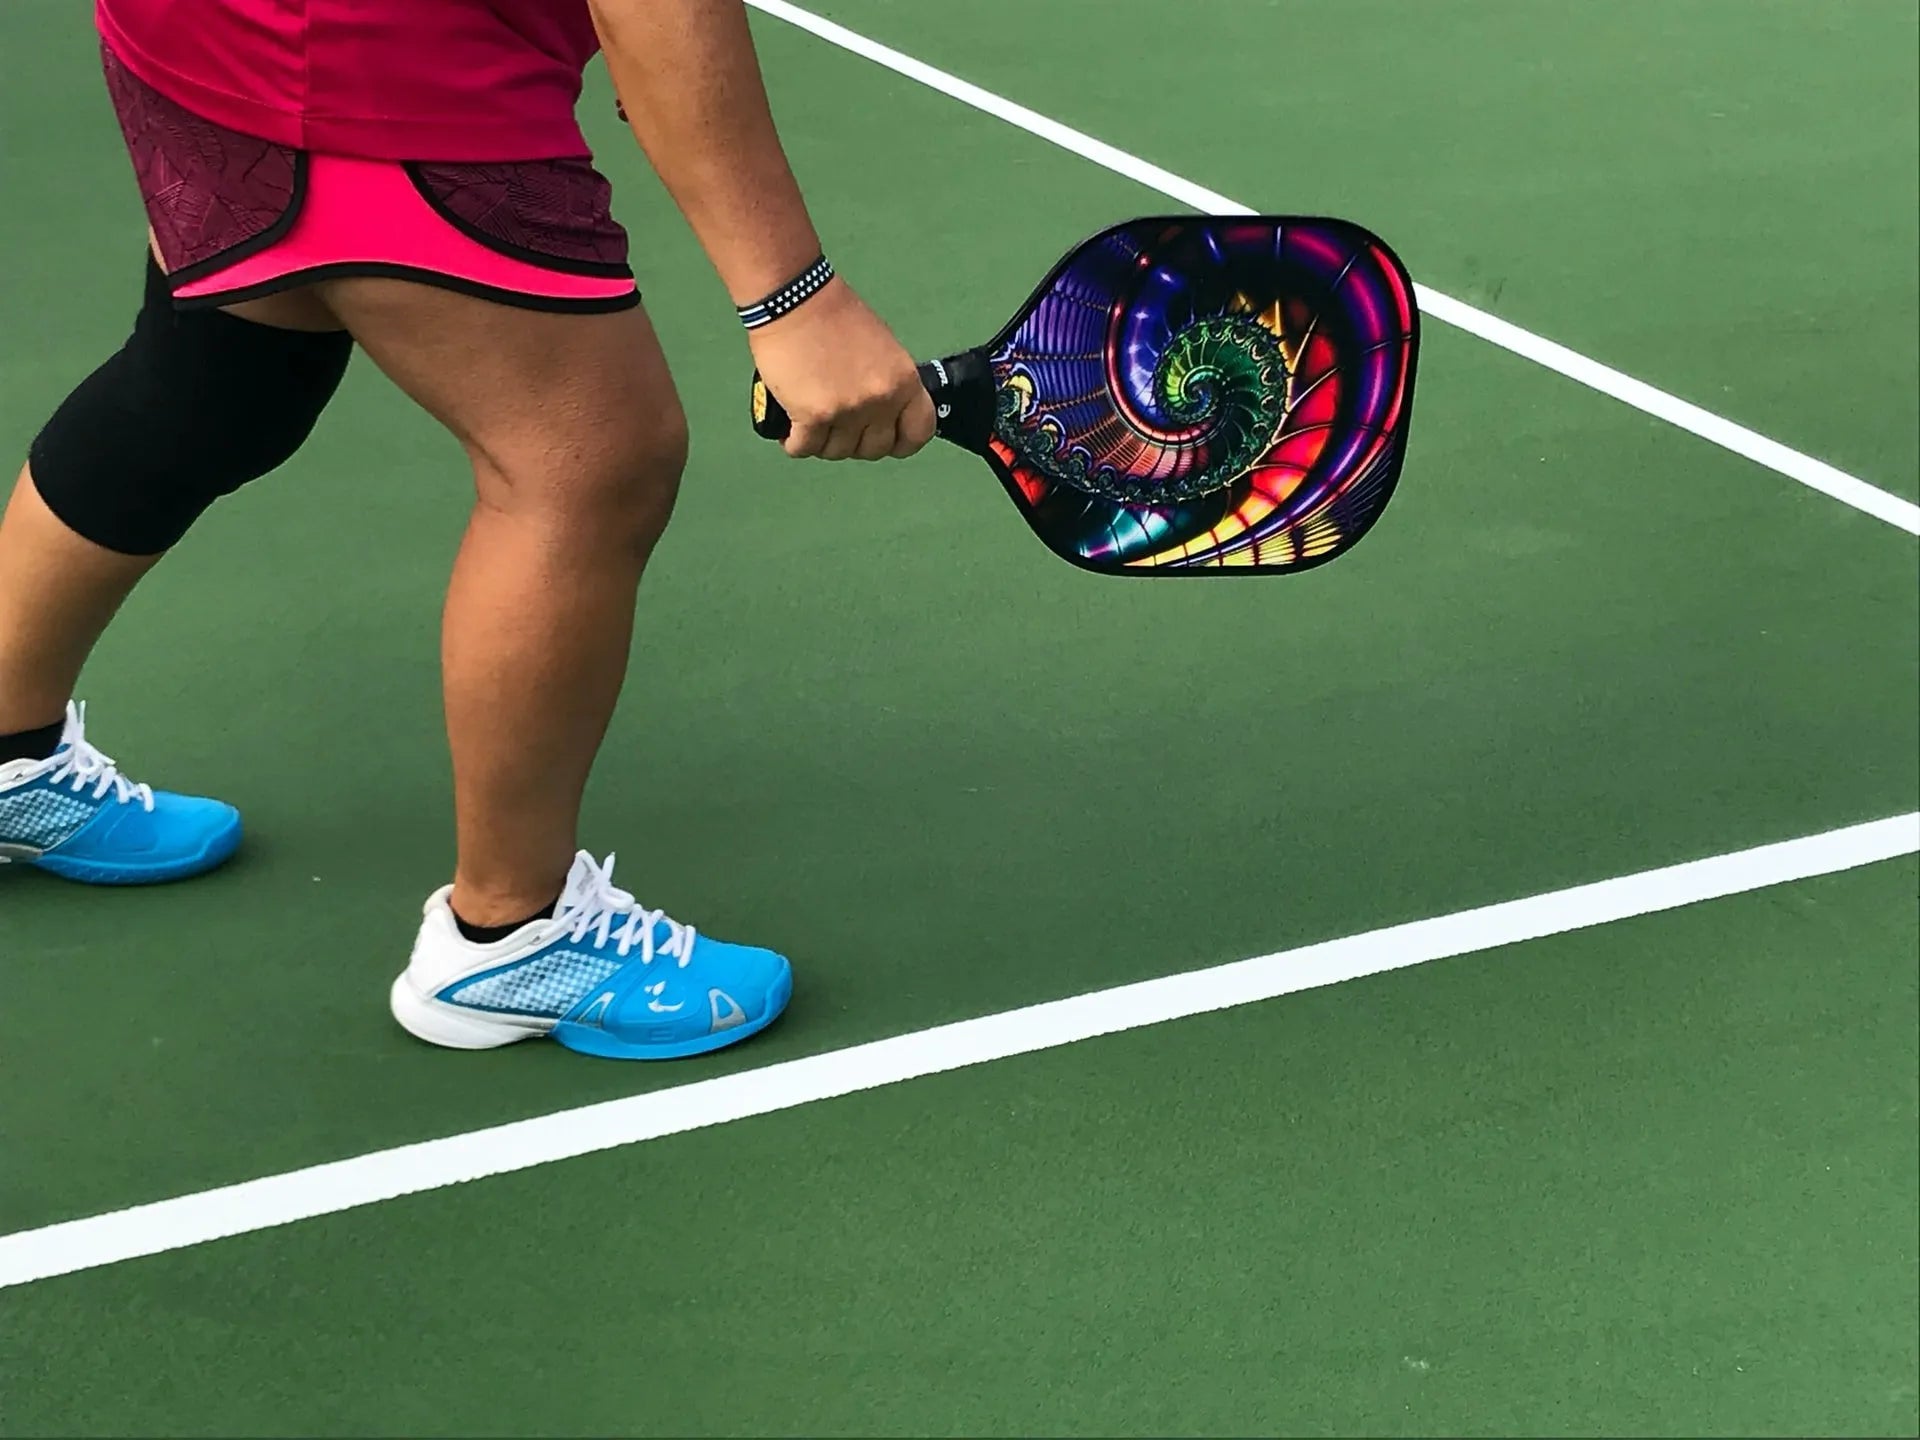 What to Look for When Choosing Clothing for Pickleball